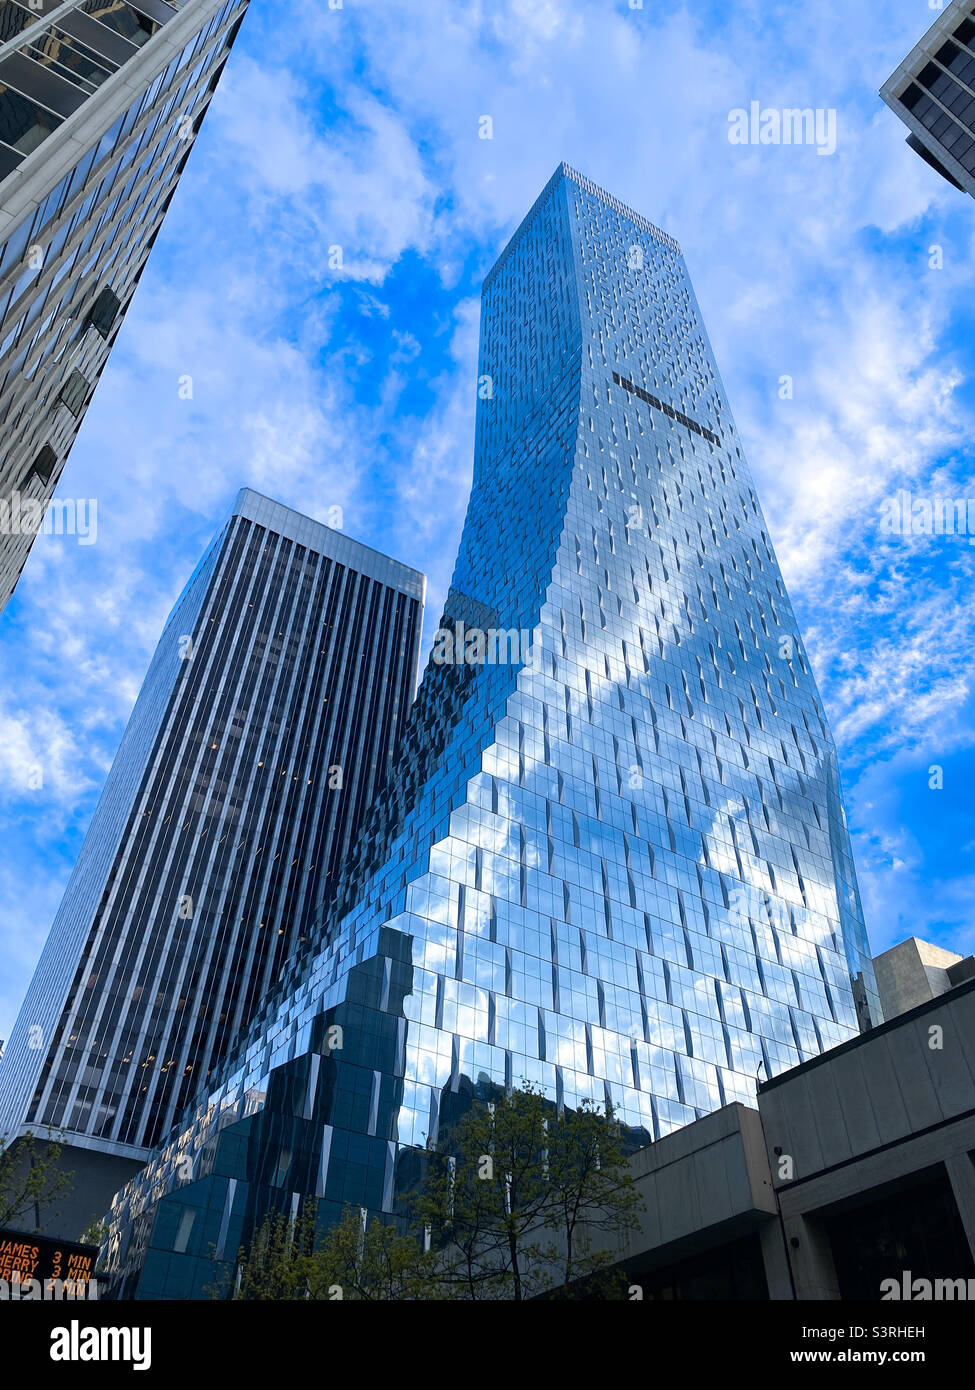 The new Rainier Square Tower dwarfing the old Rainier Tower in downtown Seattle Stock Photo